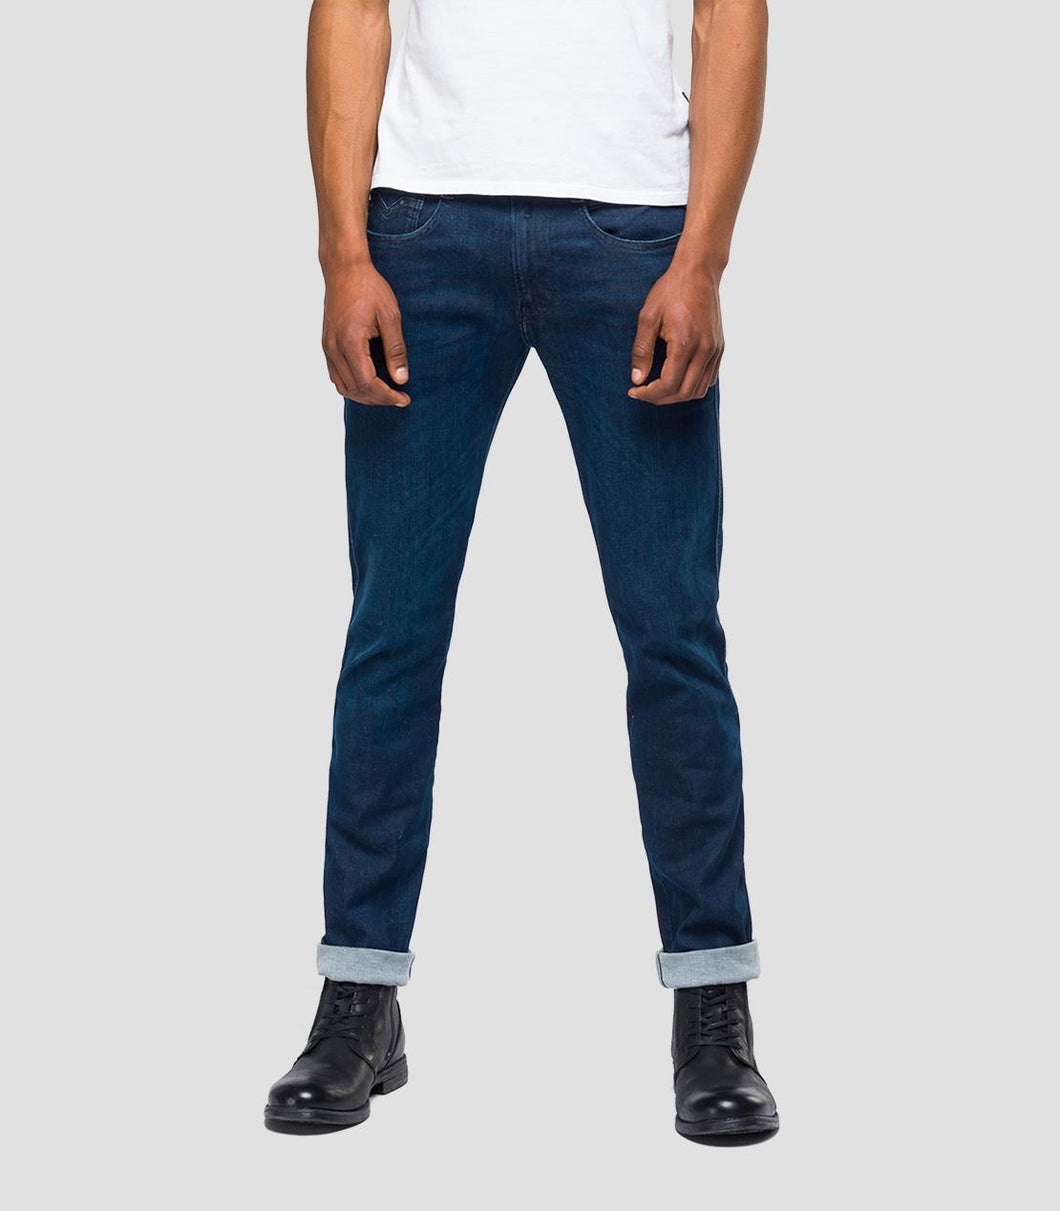 Replay Anbass Hyperflex Slim Fit Jeans Rinse Wash